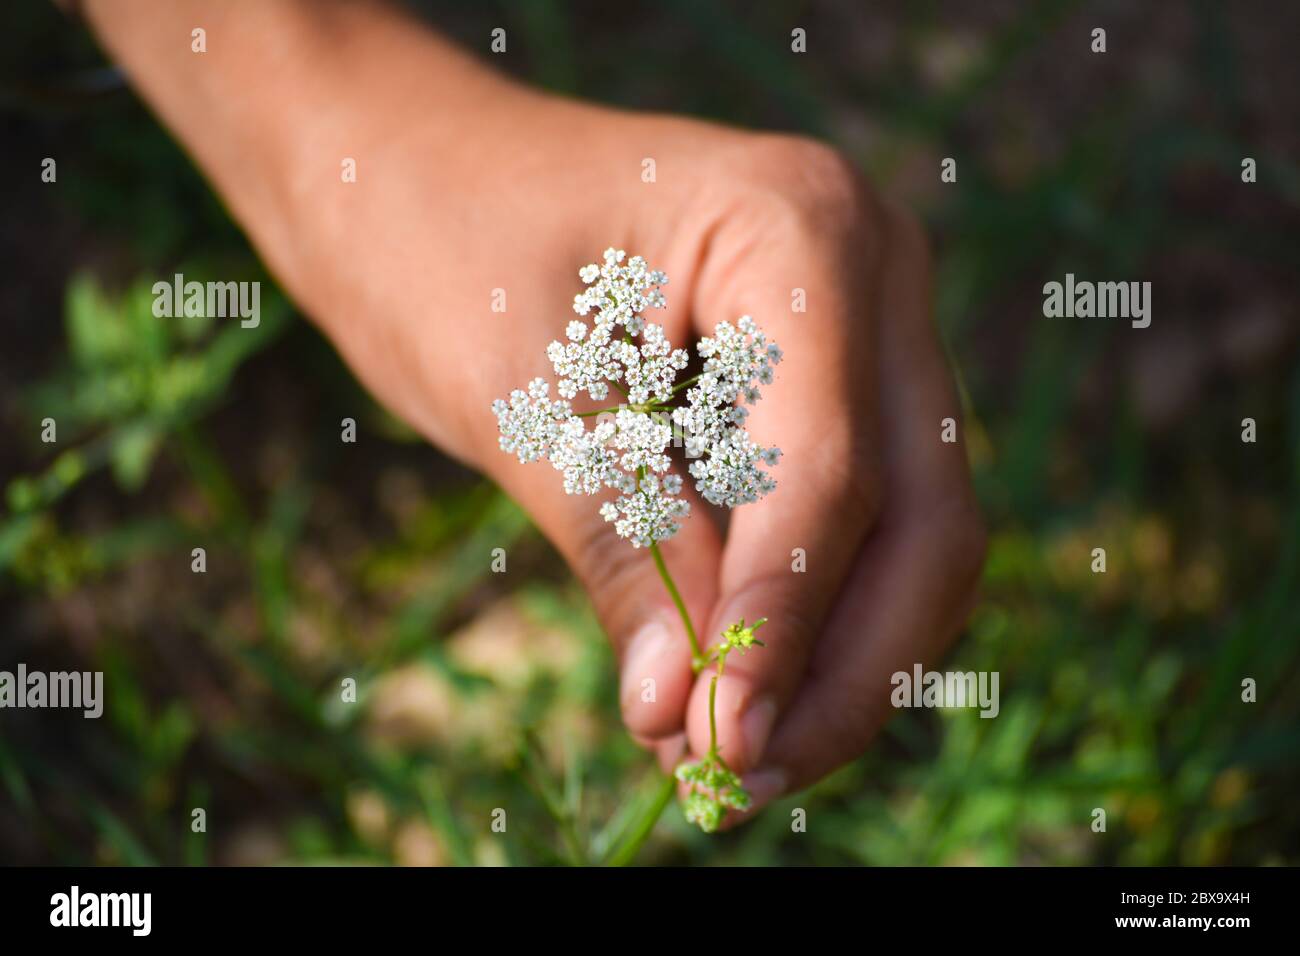 Cumin plant in hand at field. Cumin is one of the oldest spices. Stock Photo